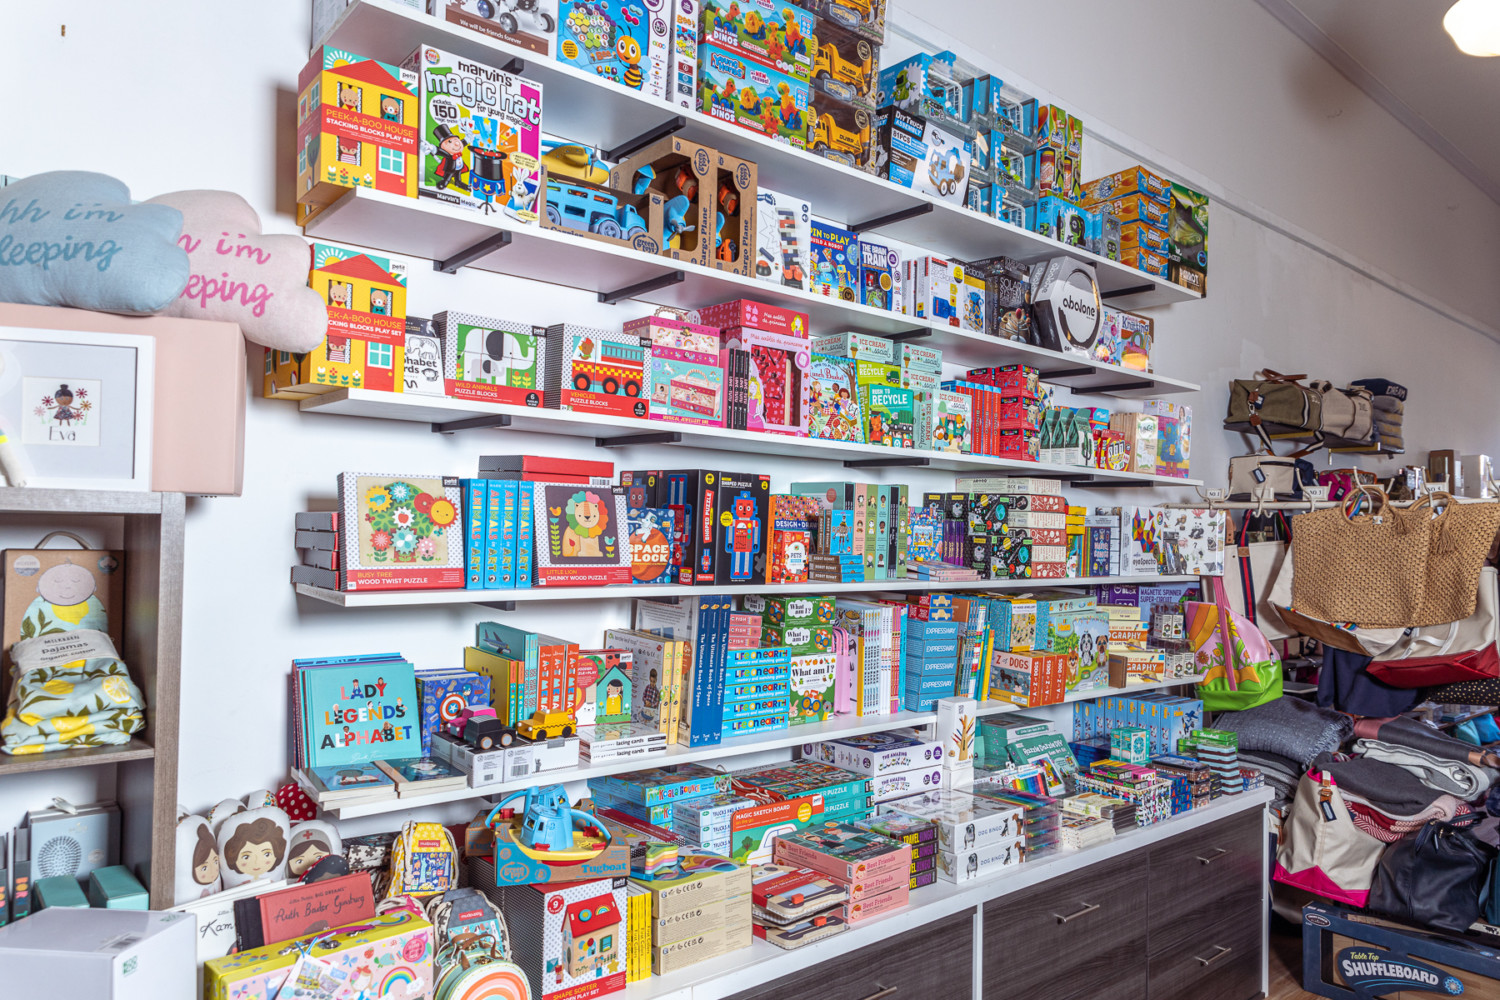 The Gifted LA wall featuring colorful games and toys.